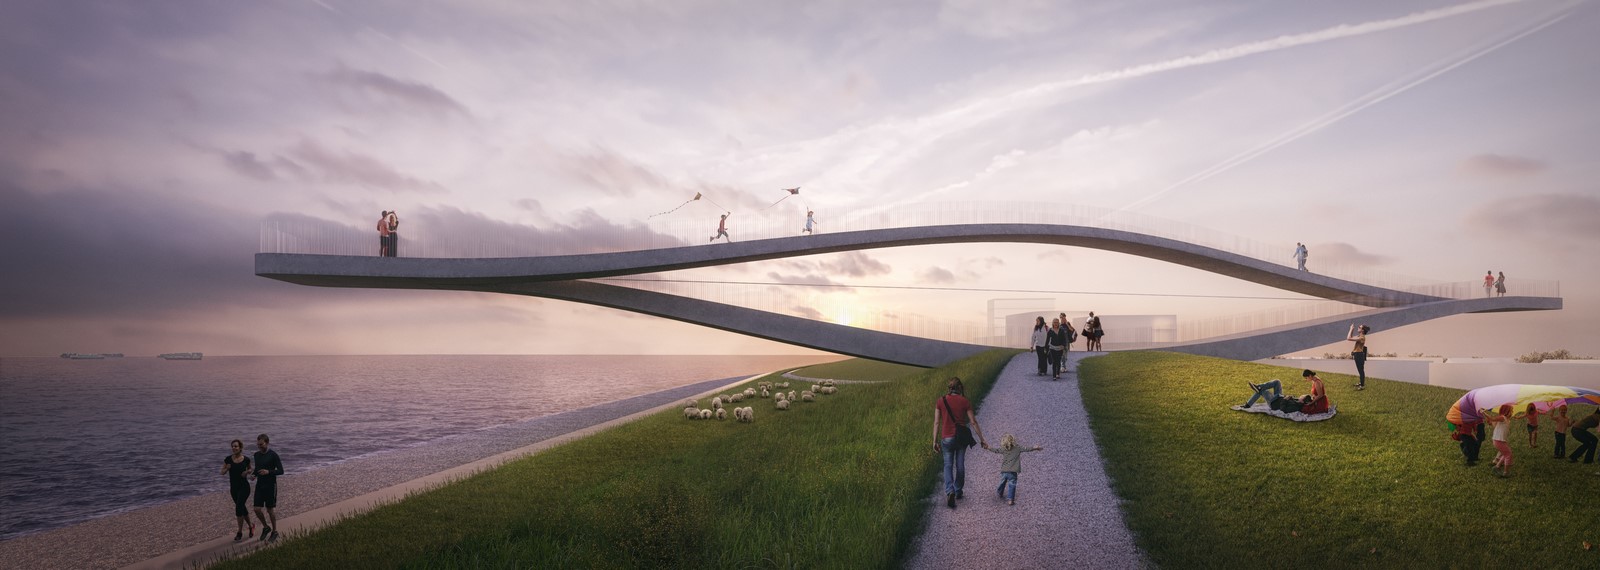 Archisearch MVRDV designed the Seasaw for Den Helder, a public art installation which responds to its context and history